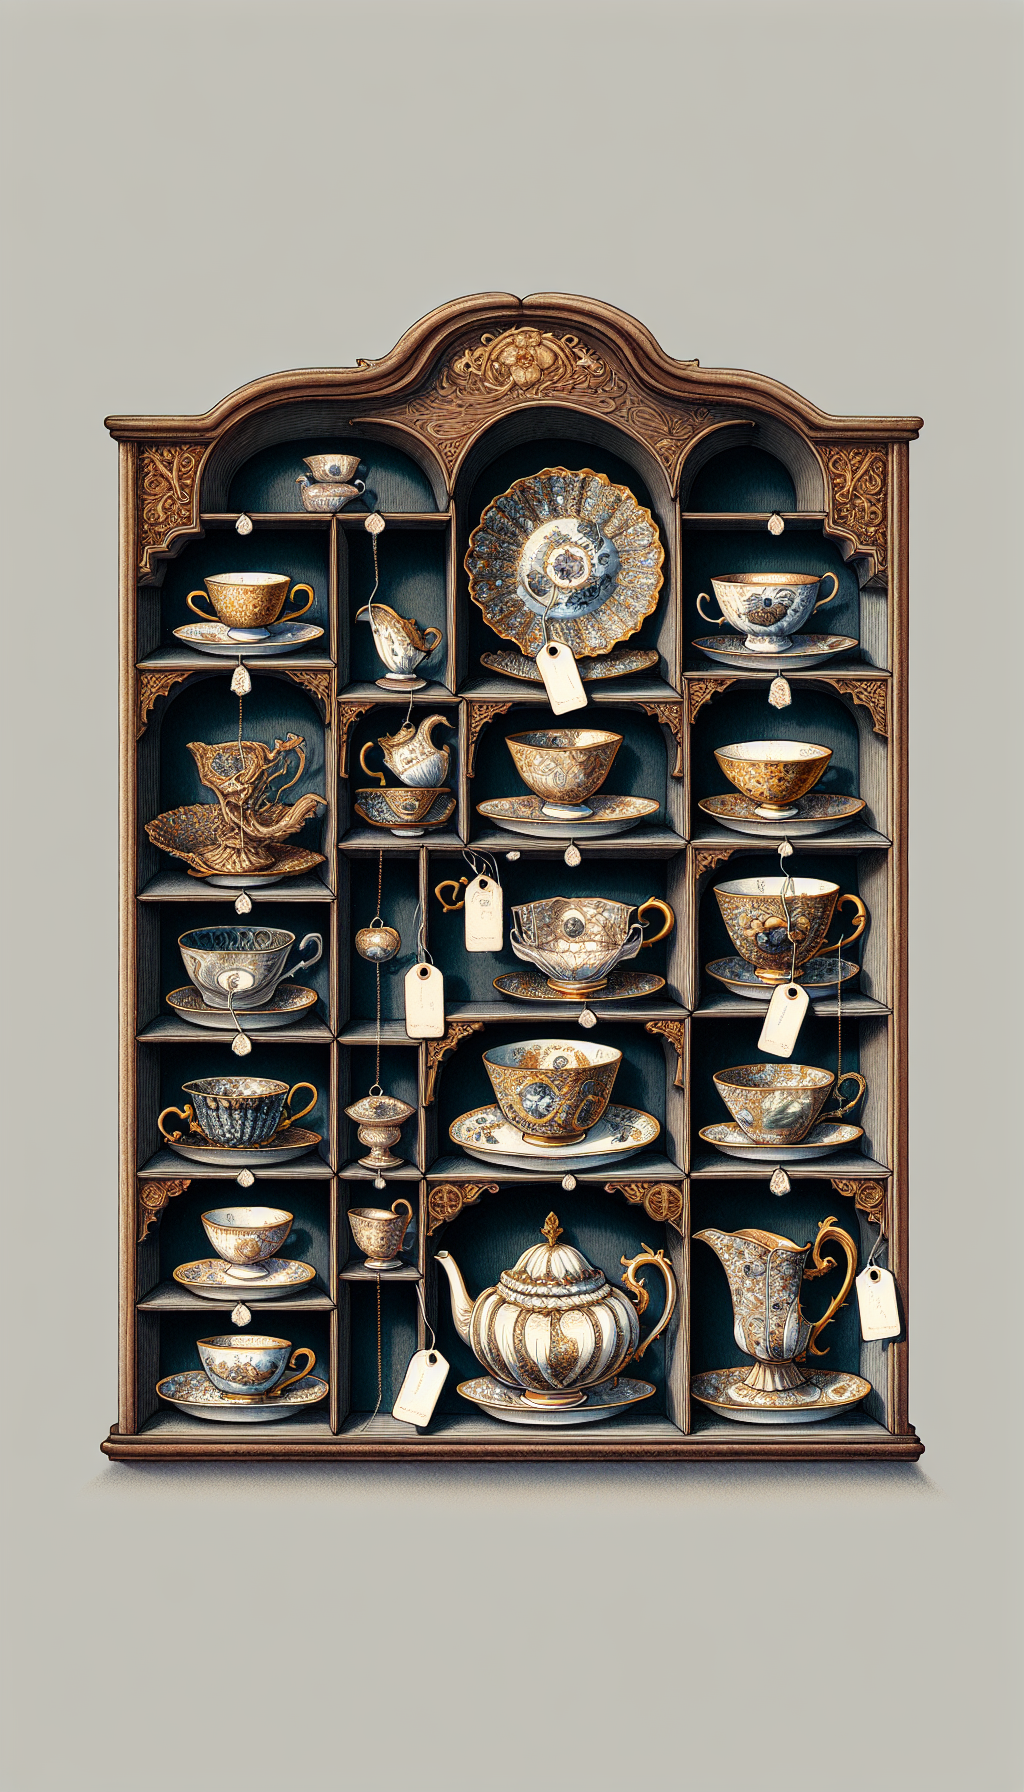 An intricate illustration depicts a whimsical, Victorian-style shadow box, each compartment housing a different antique teacup, exquisitely detailed with rare patterns and maker's marks. Glimmering touches of gold leaf highlight their value, while a delicate price tag dangles from each masterpiece, fusing the allure of rarity with the essence of antiquity's treasure.